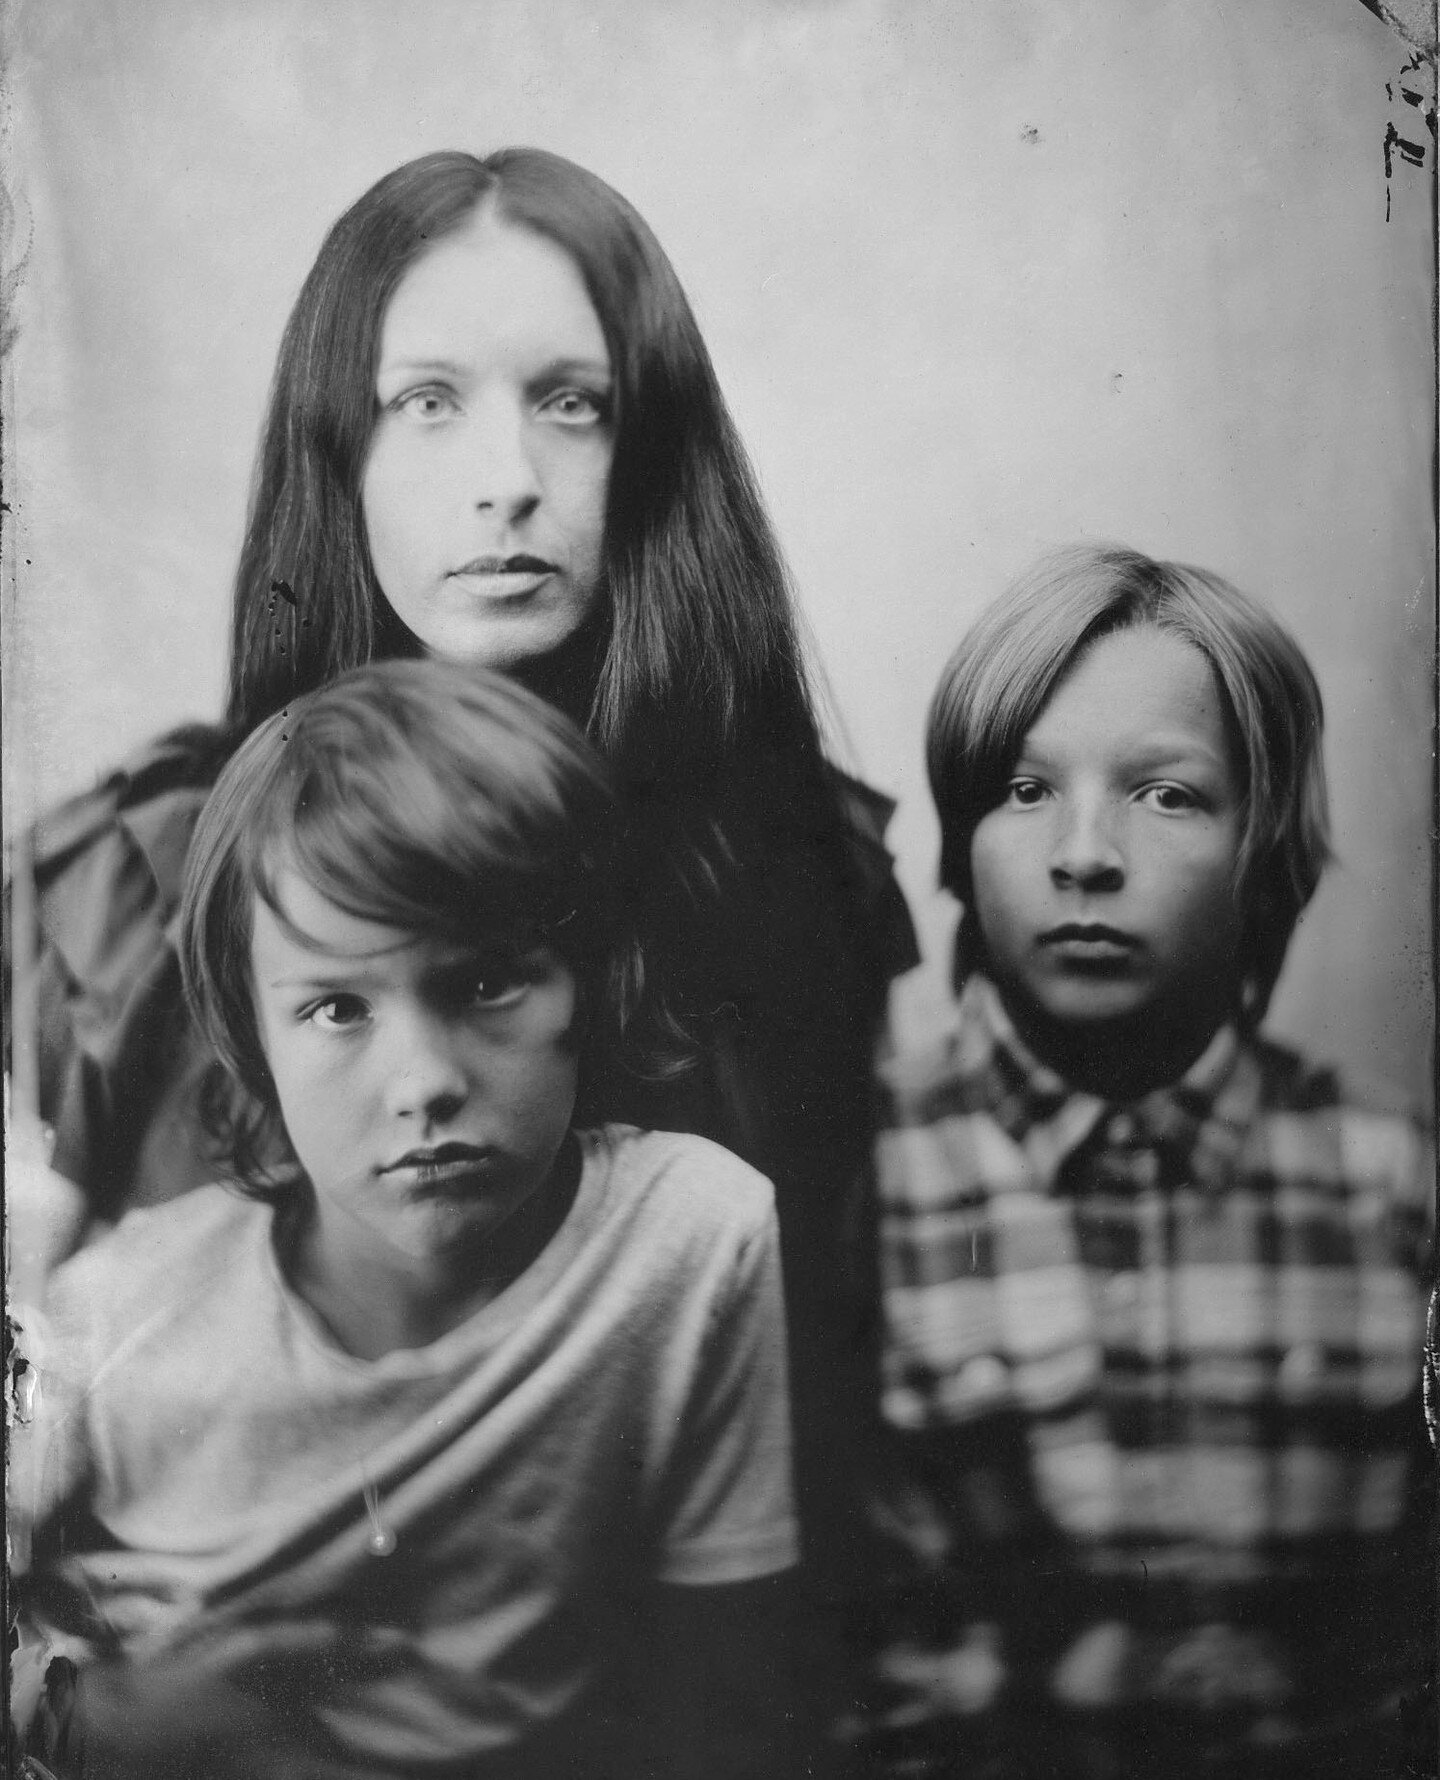 Happy Mothers Day🌷⁠
.⁠
On this joyous, sorrowful, celebratory, painful, magical, angry day and all the other feelings this day holds and represents; I send my love and gratitude.⁠
.⁠
This beautifully haunting photo of Matthew, Rhys and me was taken 